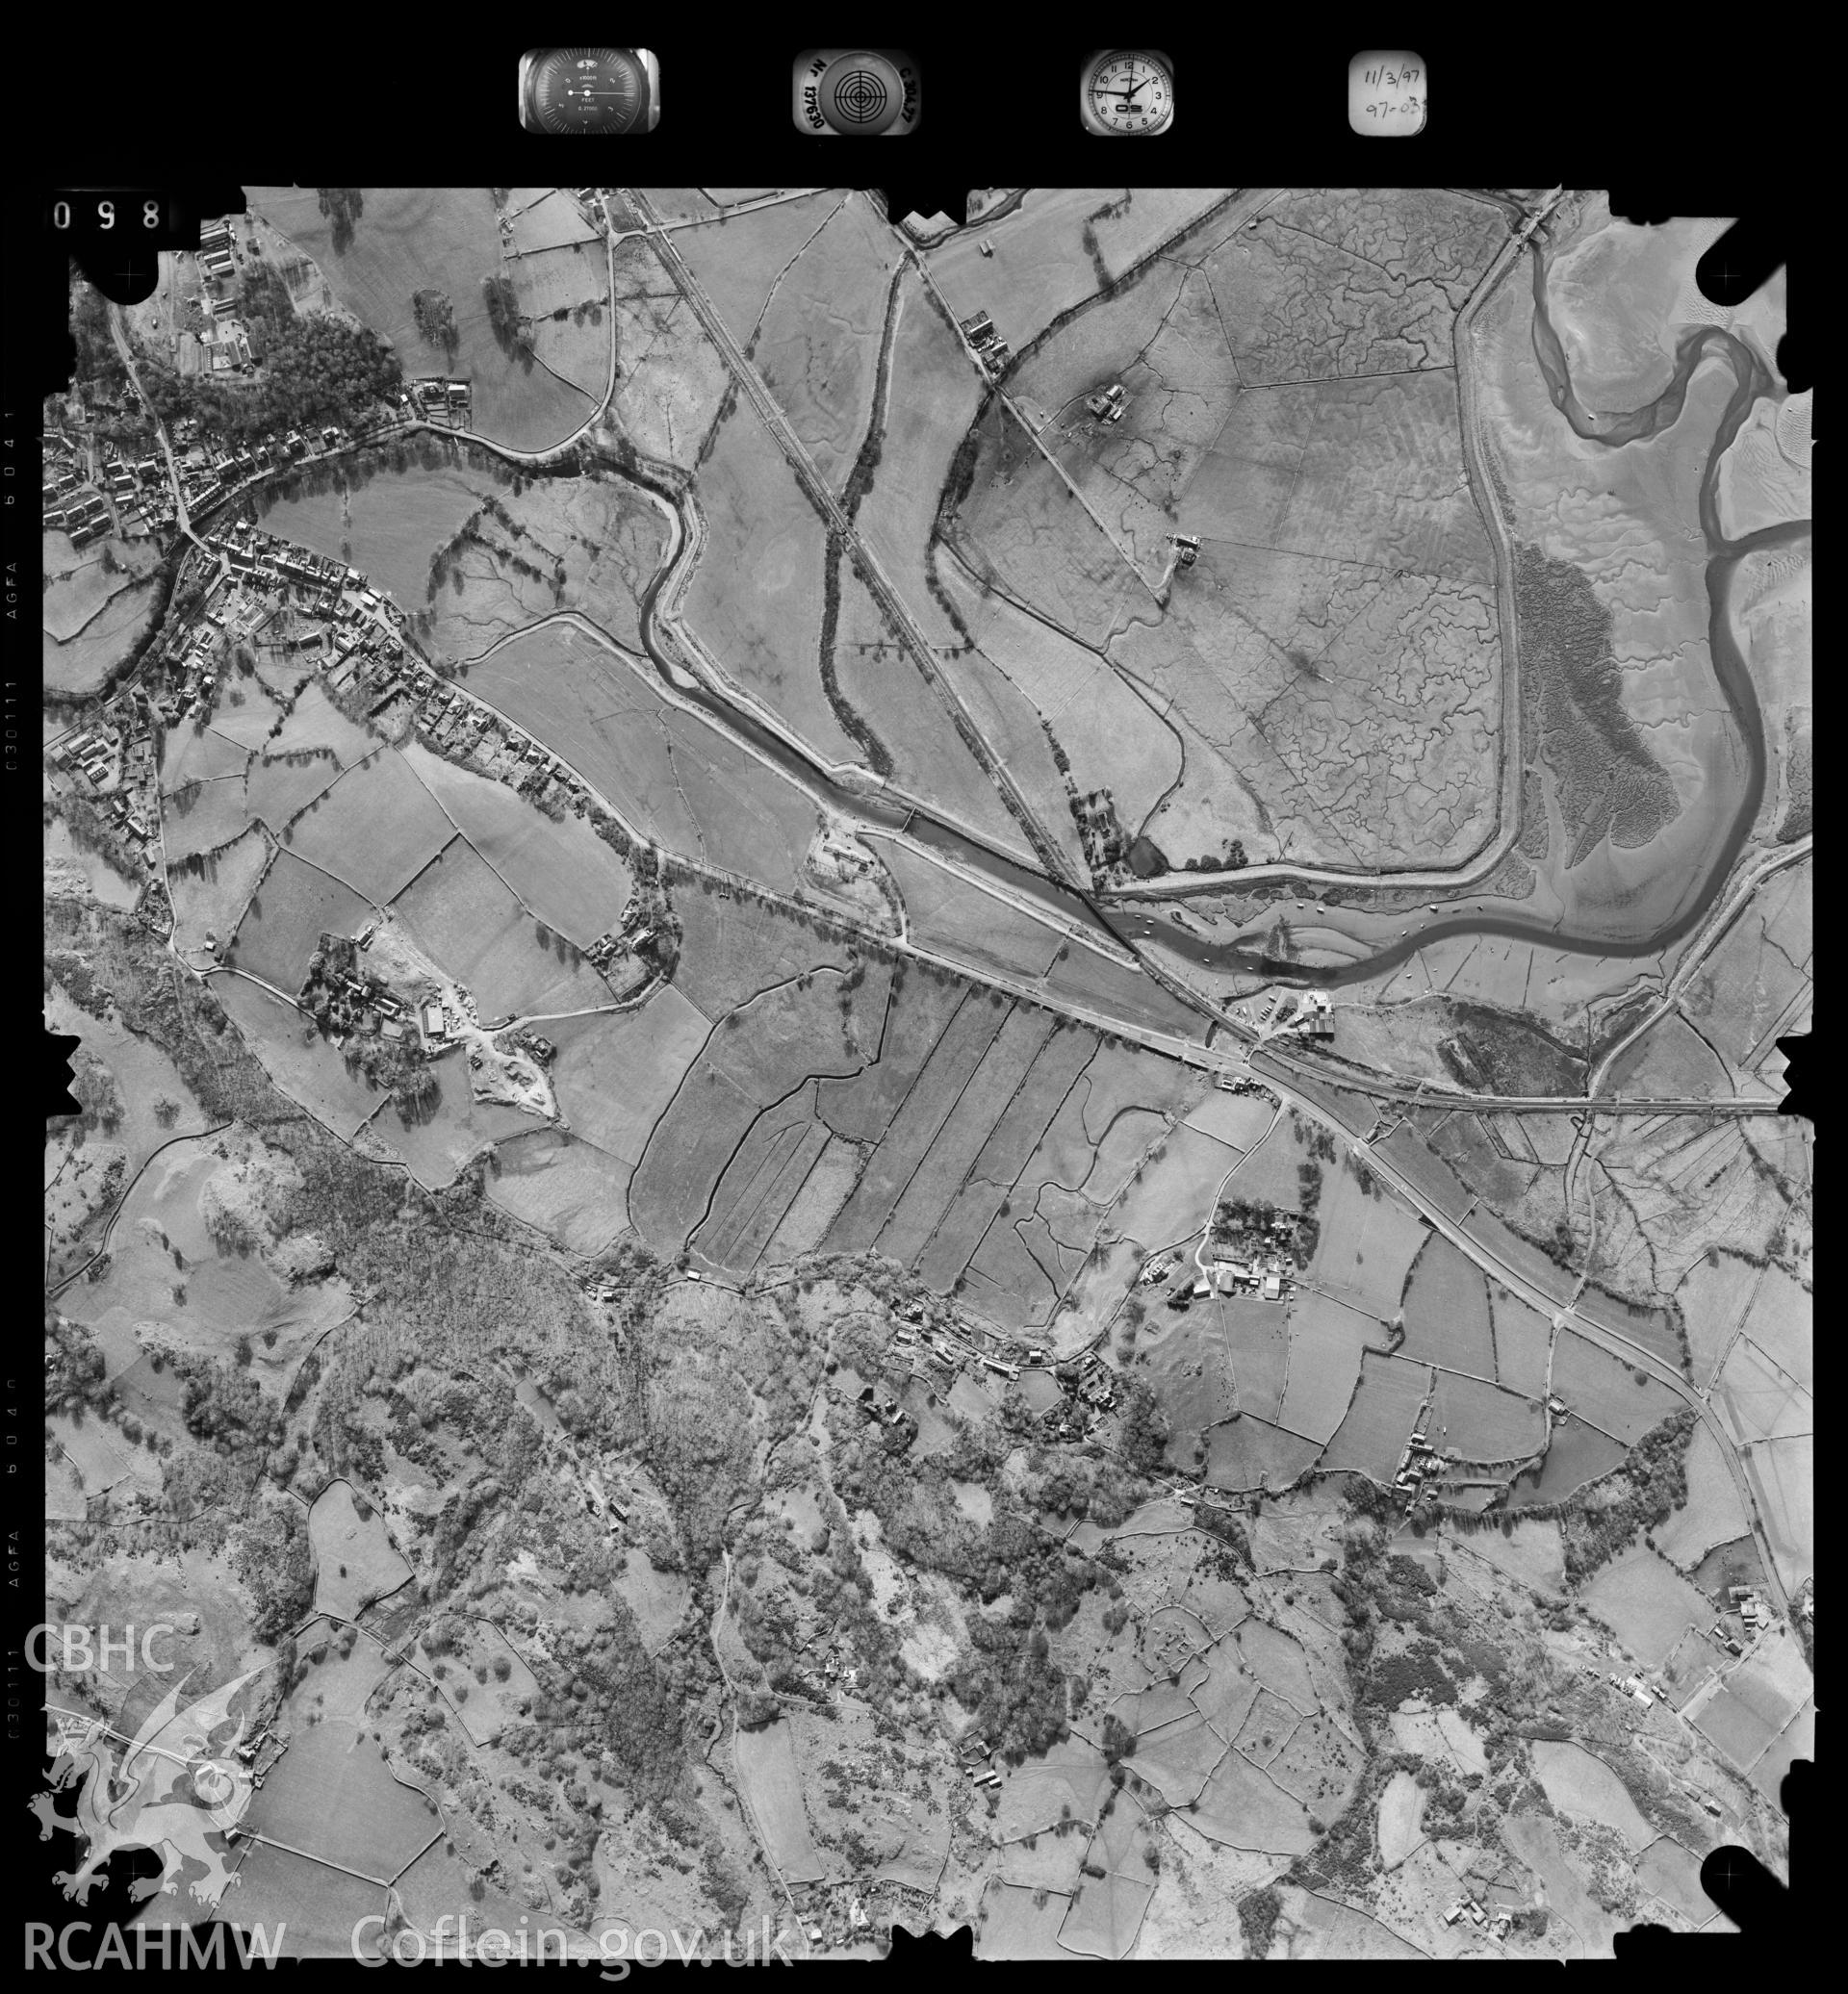 Digitized copy of an aerial photograph showing the Llanbedr area, taken by Ordnance Survey, 1997.